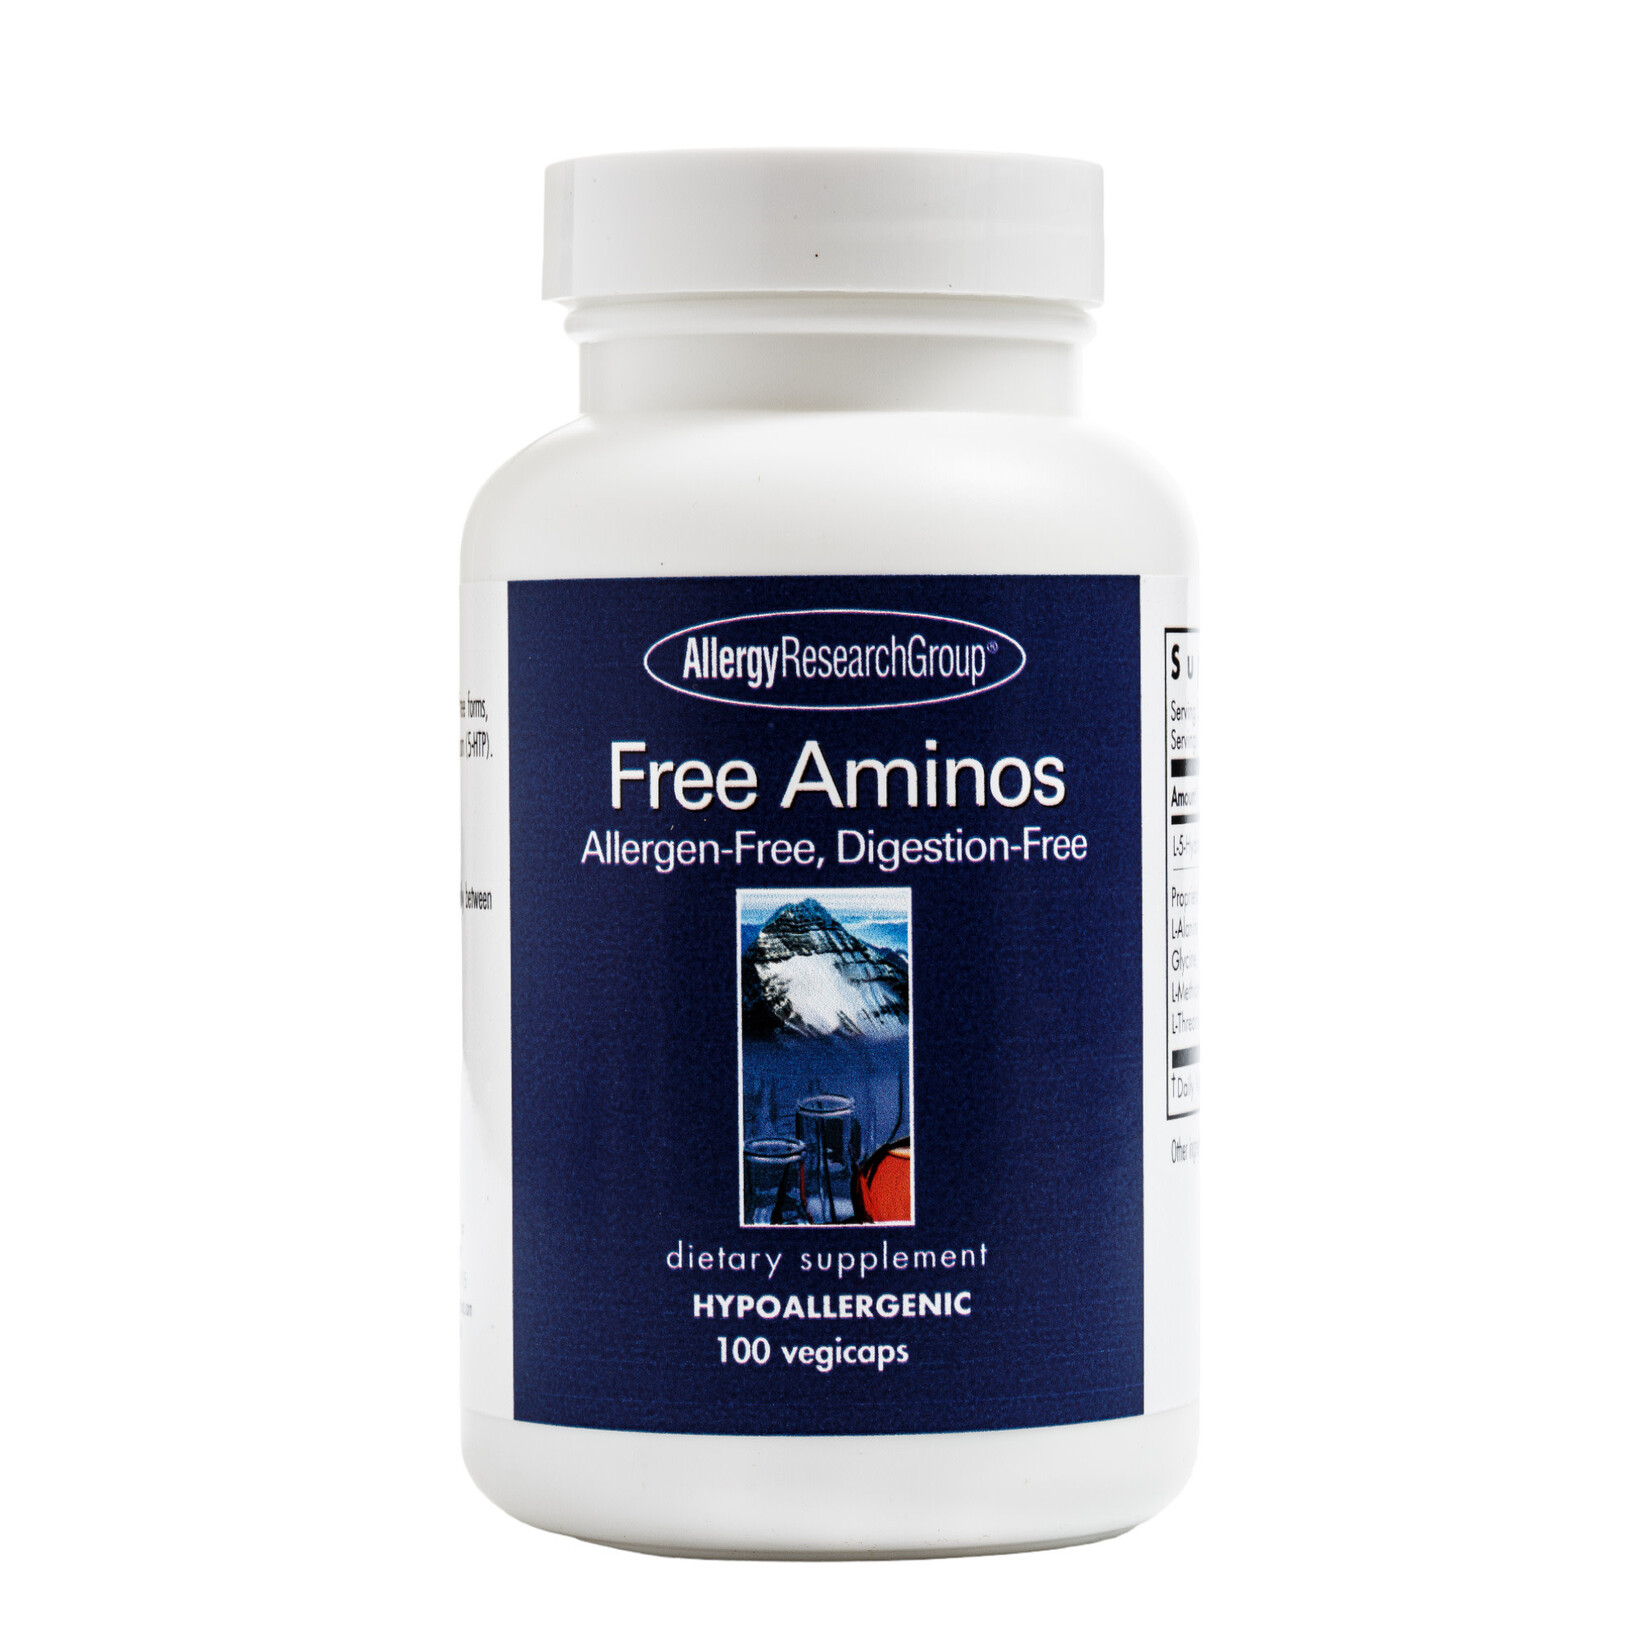 Allergy Research Group Free Aminos 100c Allergy Research Group